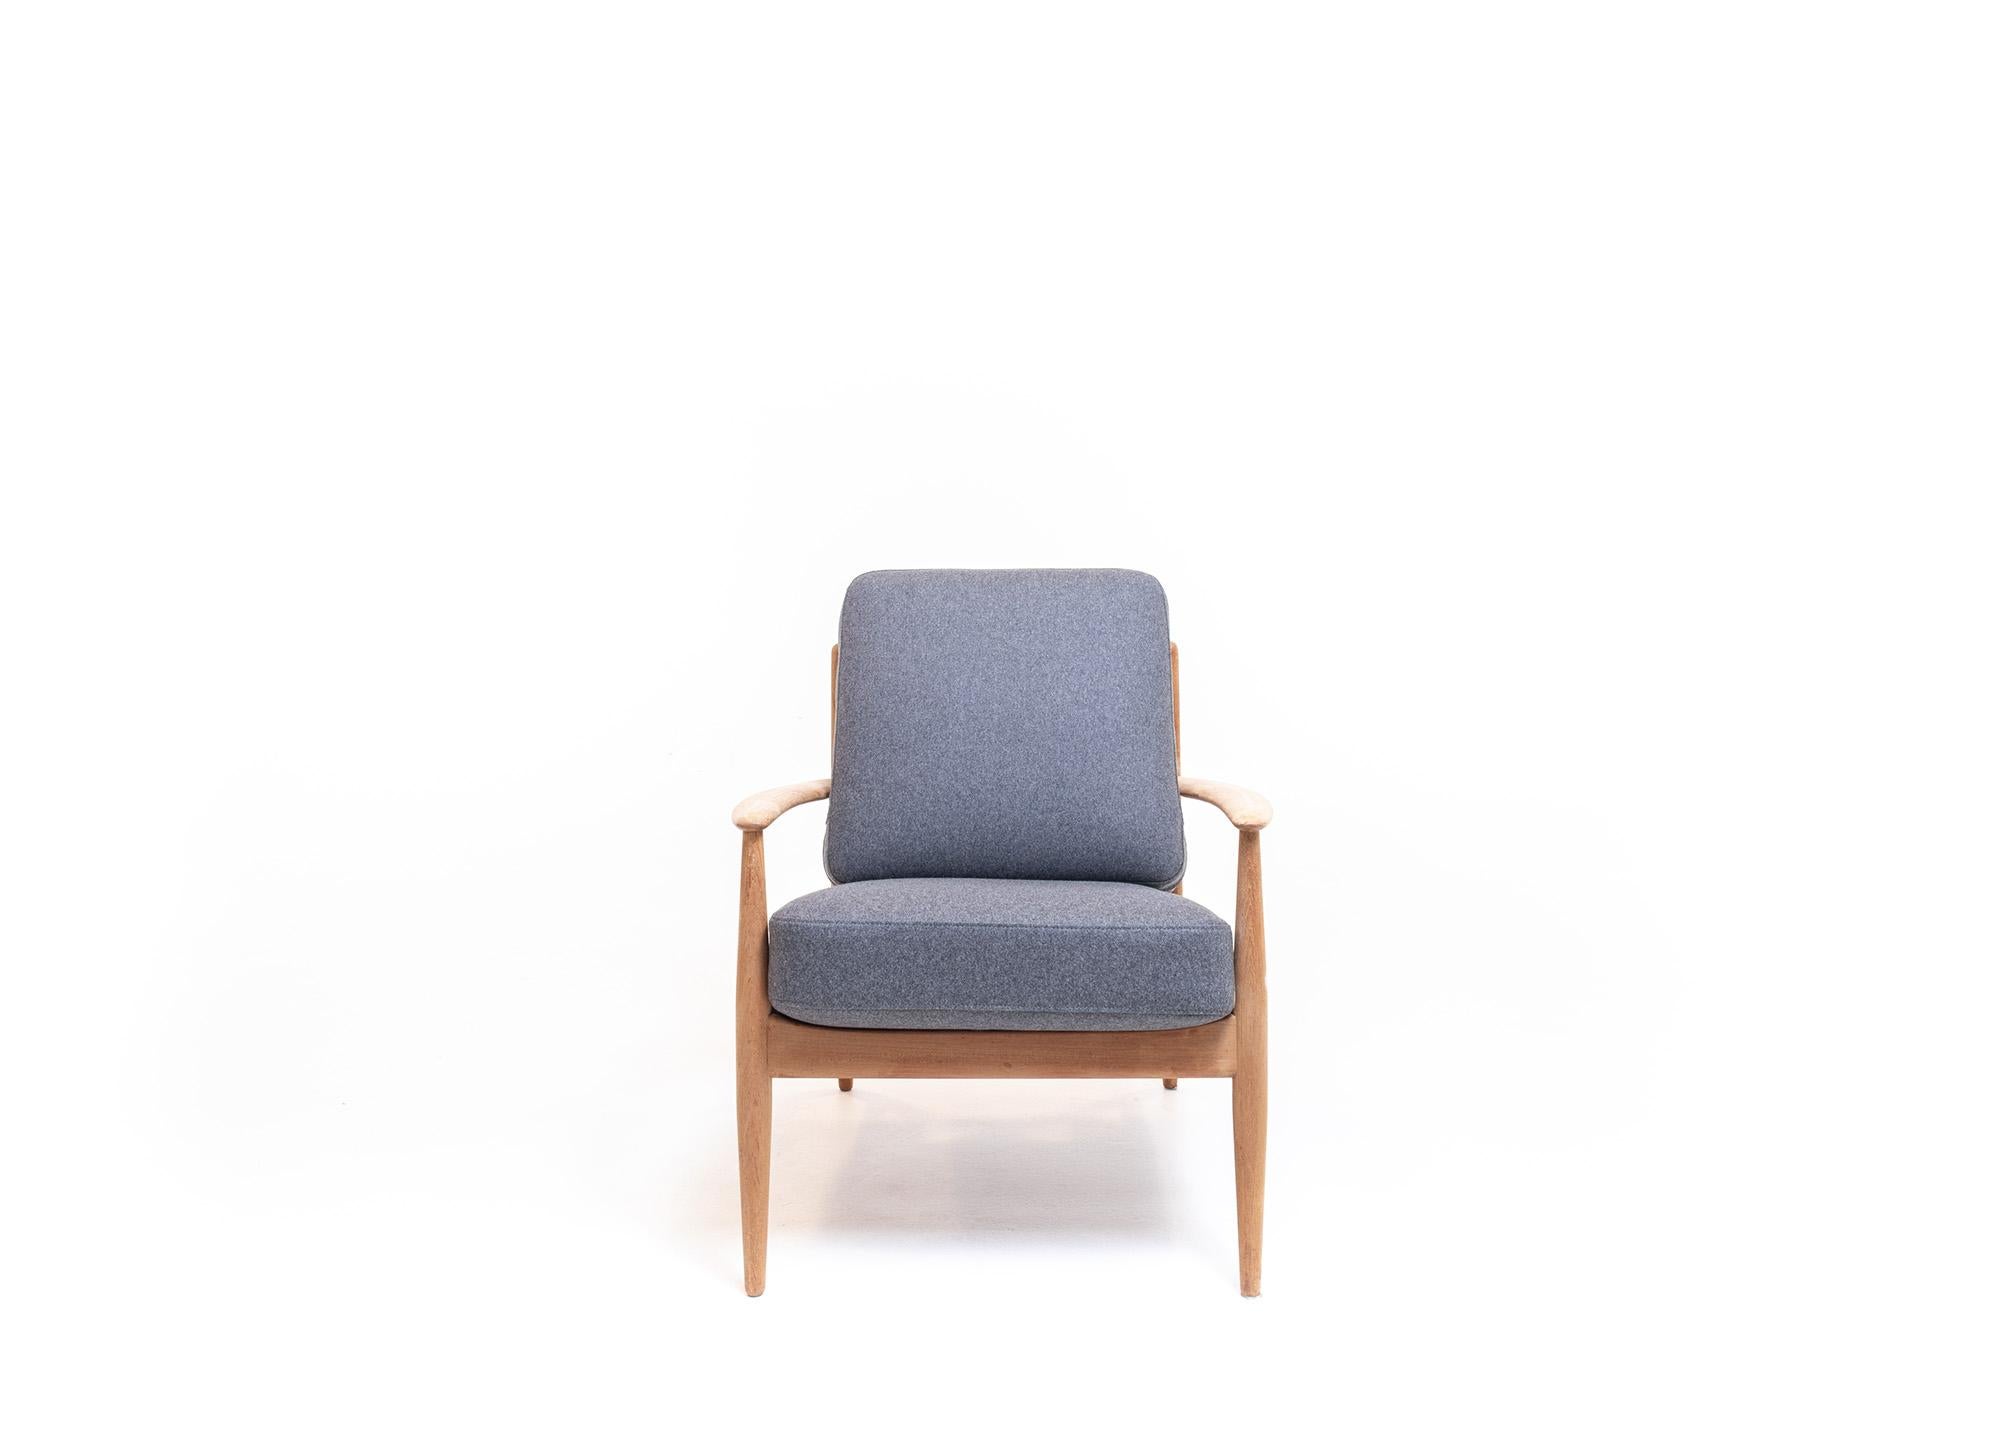 A stunning Mid-Century Modern piece designed by renowned Danish designer Grete Jalk for France & Søn. Made from solid oak wood, this lounge chair displays a sense of sophistication and elegance that is characteristic of Mid-Century Modern